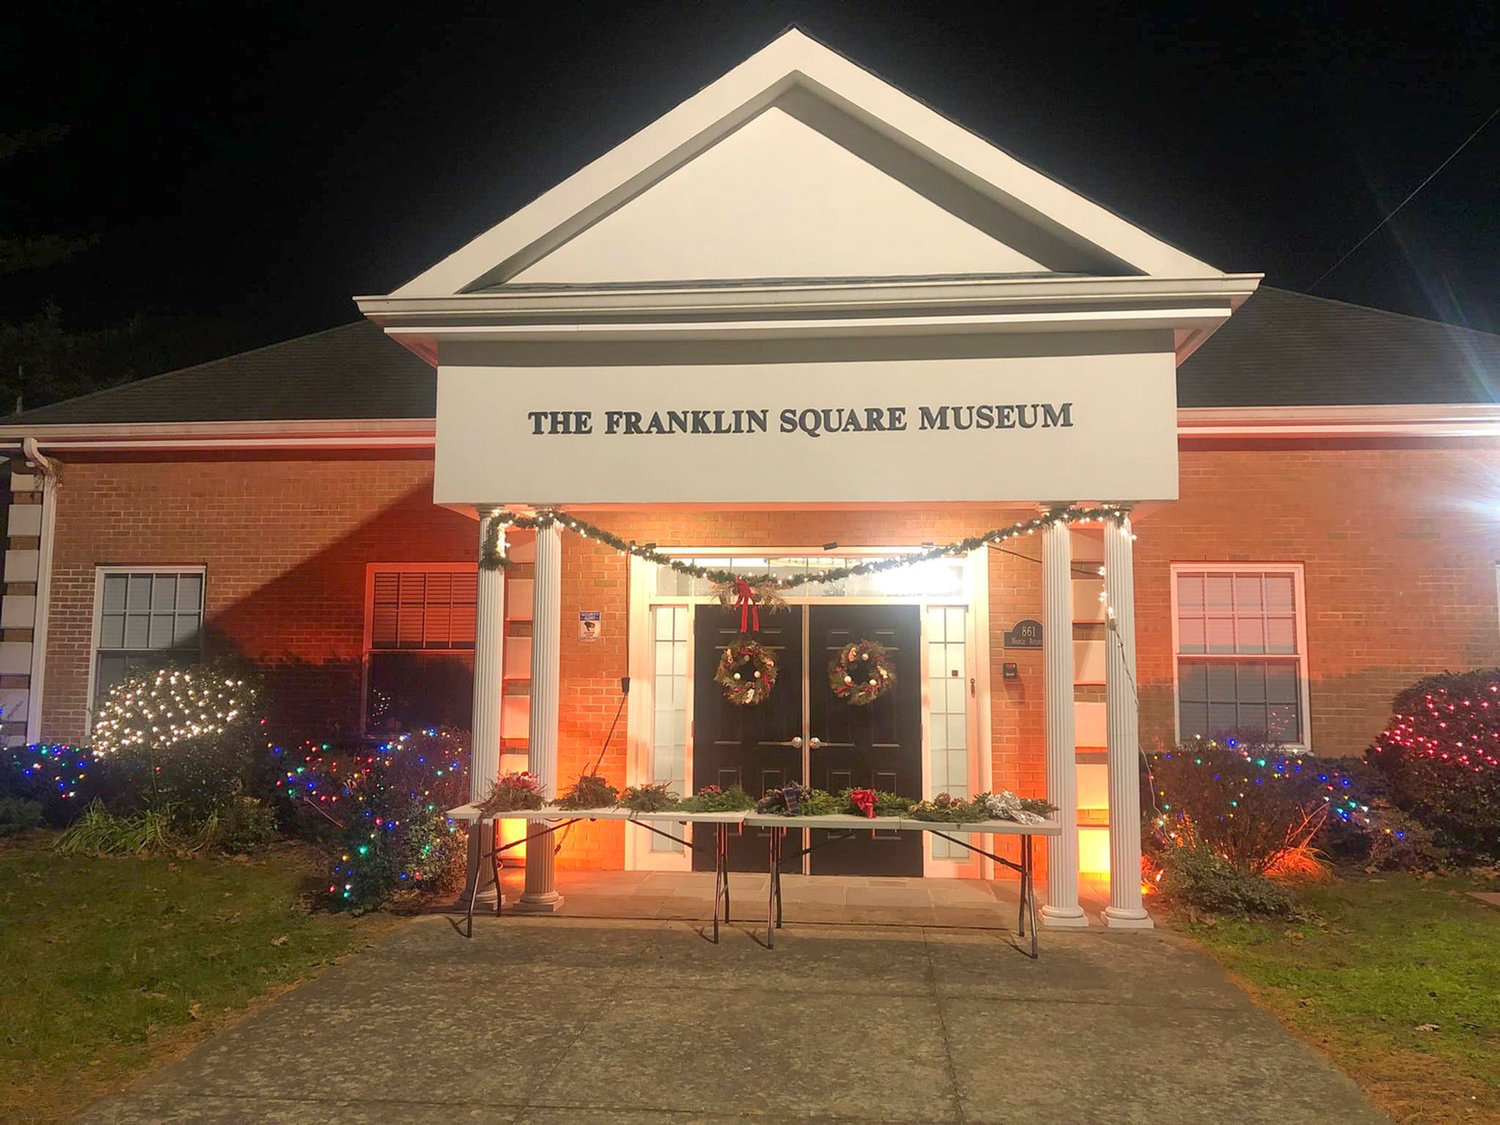 The Franklin Square Historical Society is holding its annual dinner at on April 28 at the Plattduetsche Park Restaurant in Franklin Square at 5 p.m